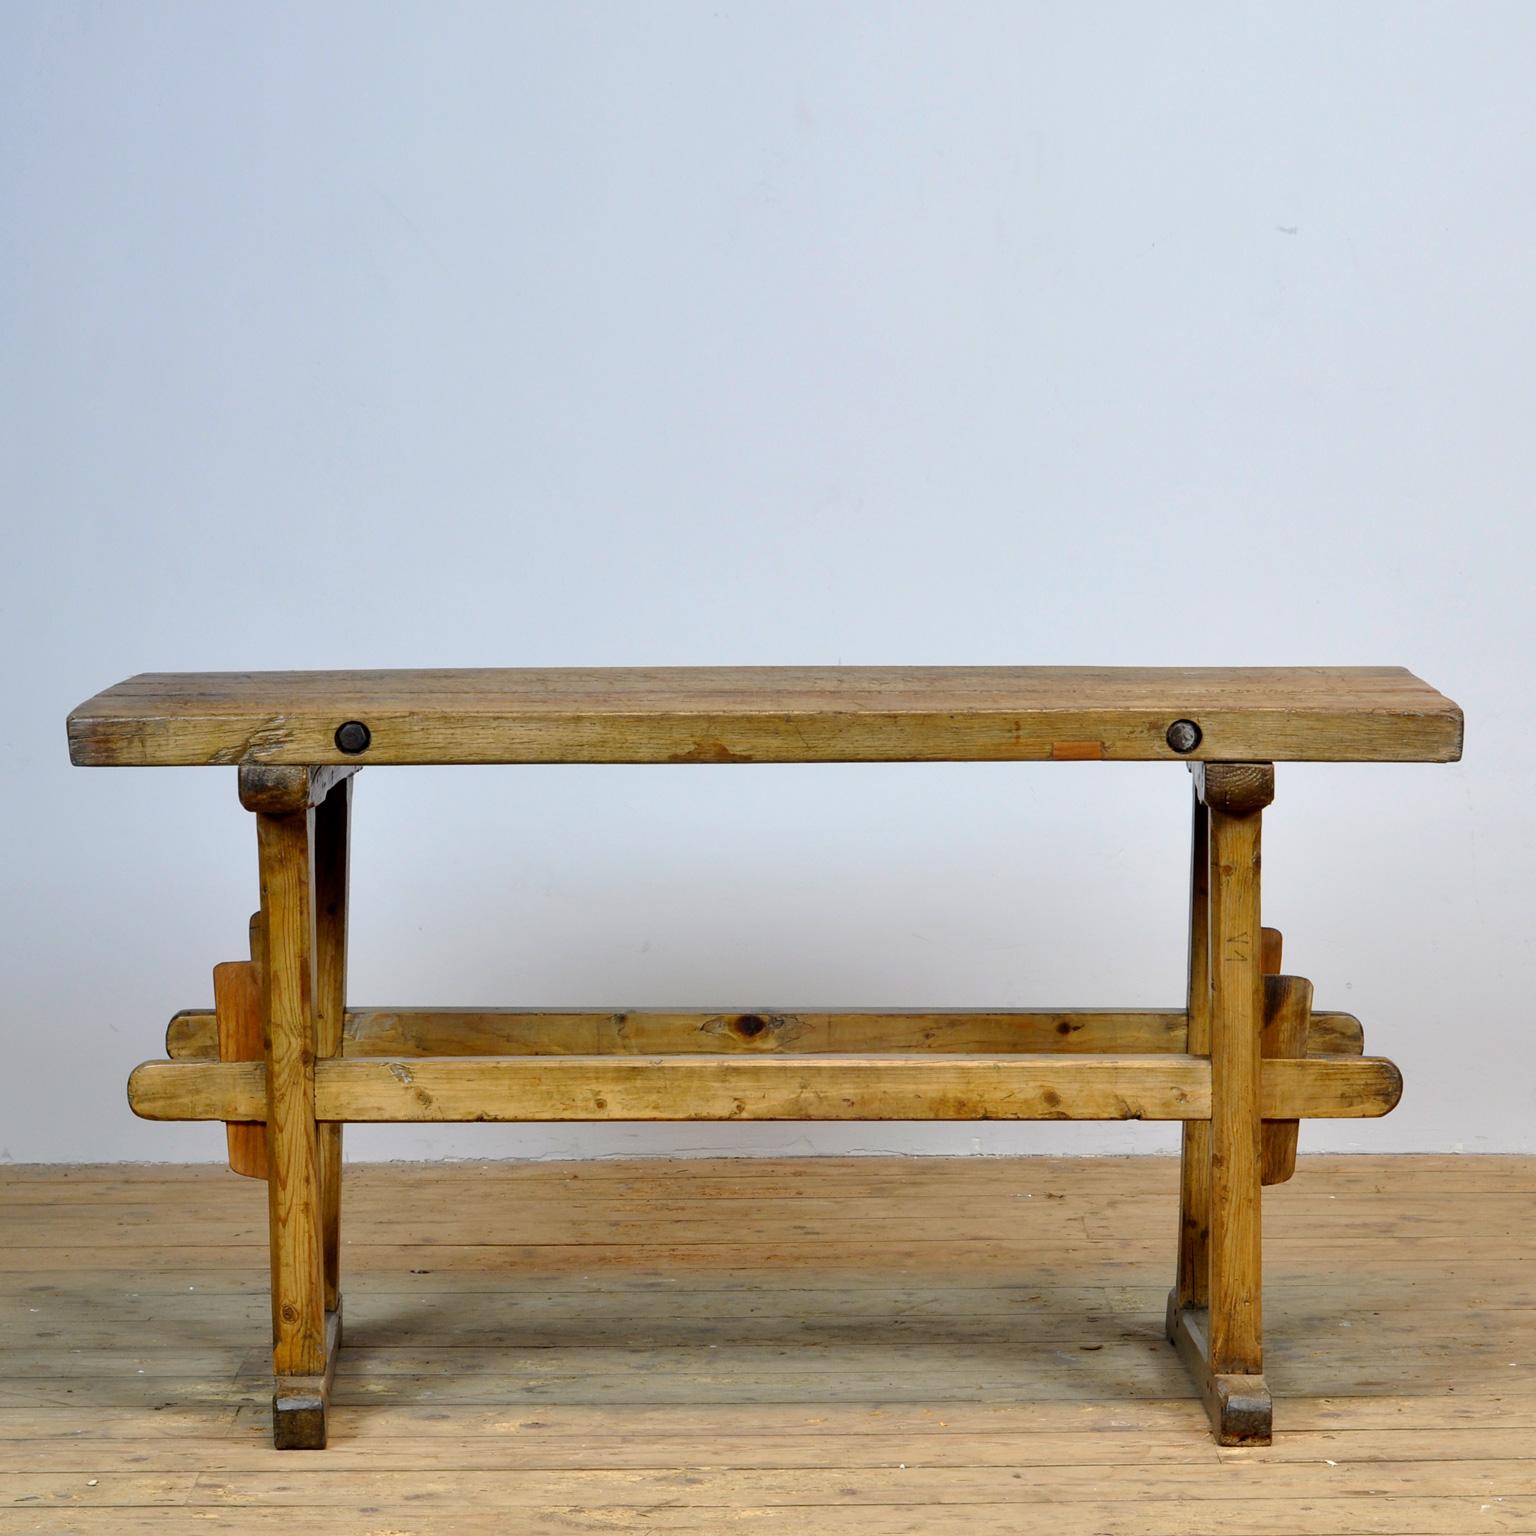 Oak farmers worktable with a nice distressed top of 6 cm thick. The top is strengthened with 2 iron bars.